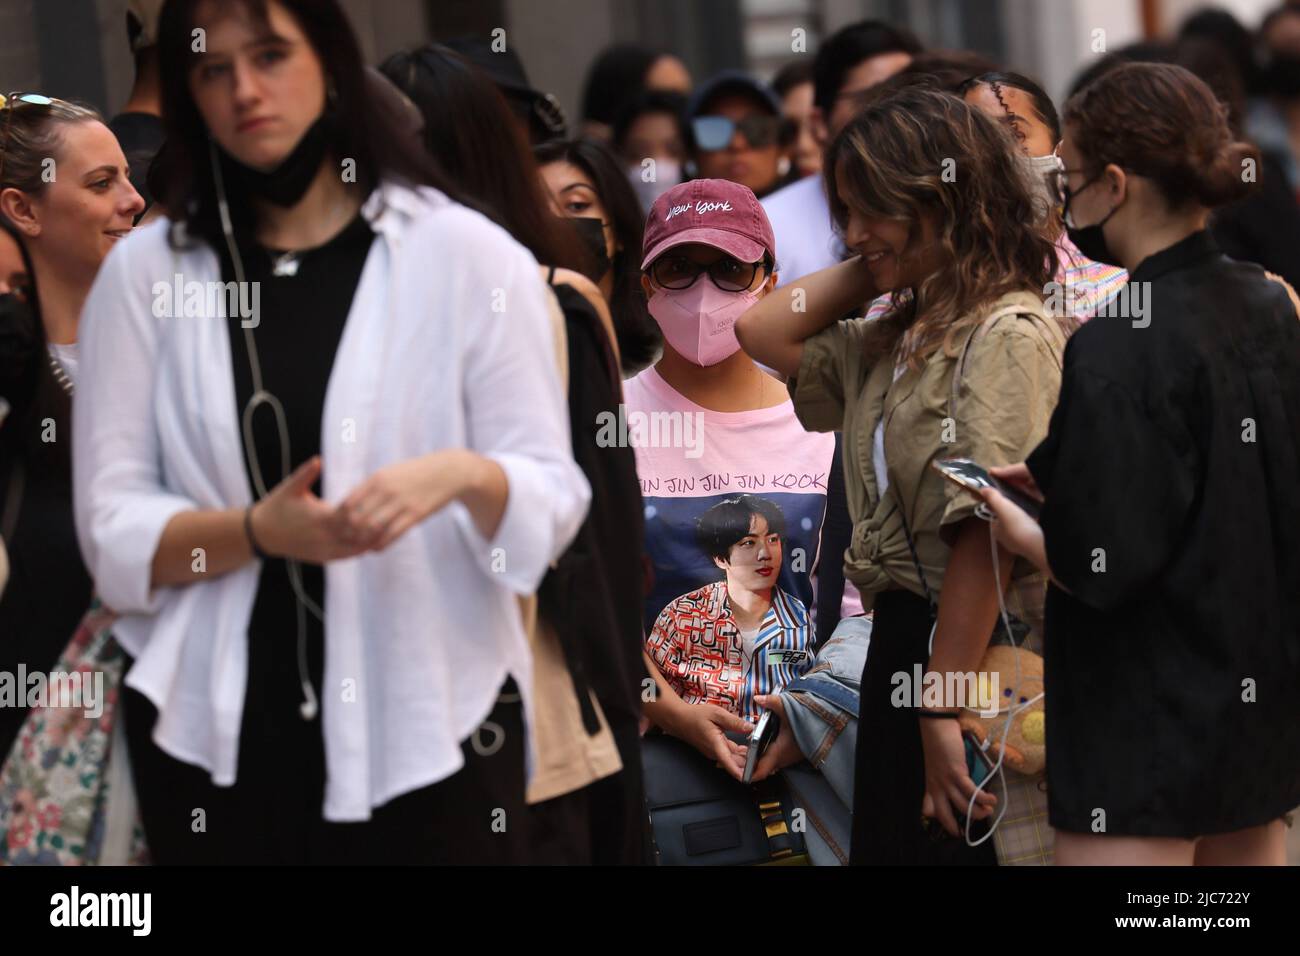 Fans of the South Korean boy band BTS wait in line to enter a pop-up shop selling BTS merchandise after the release of their new album 'Proof' in in Manhattan in New York City, New York, U.S., June 10, 2022. REUTERS/Mike Segar Stock Photo